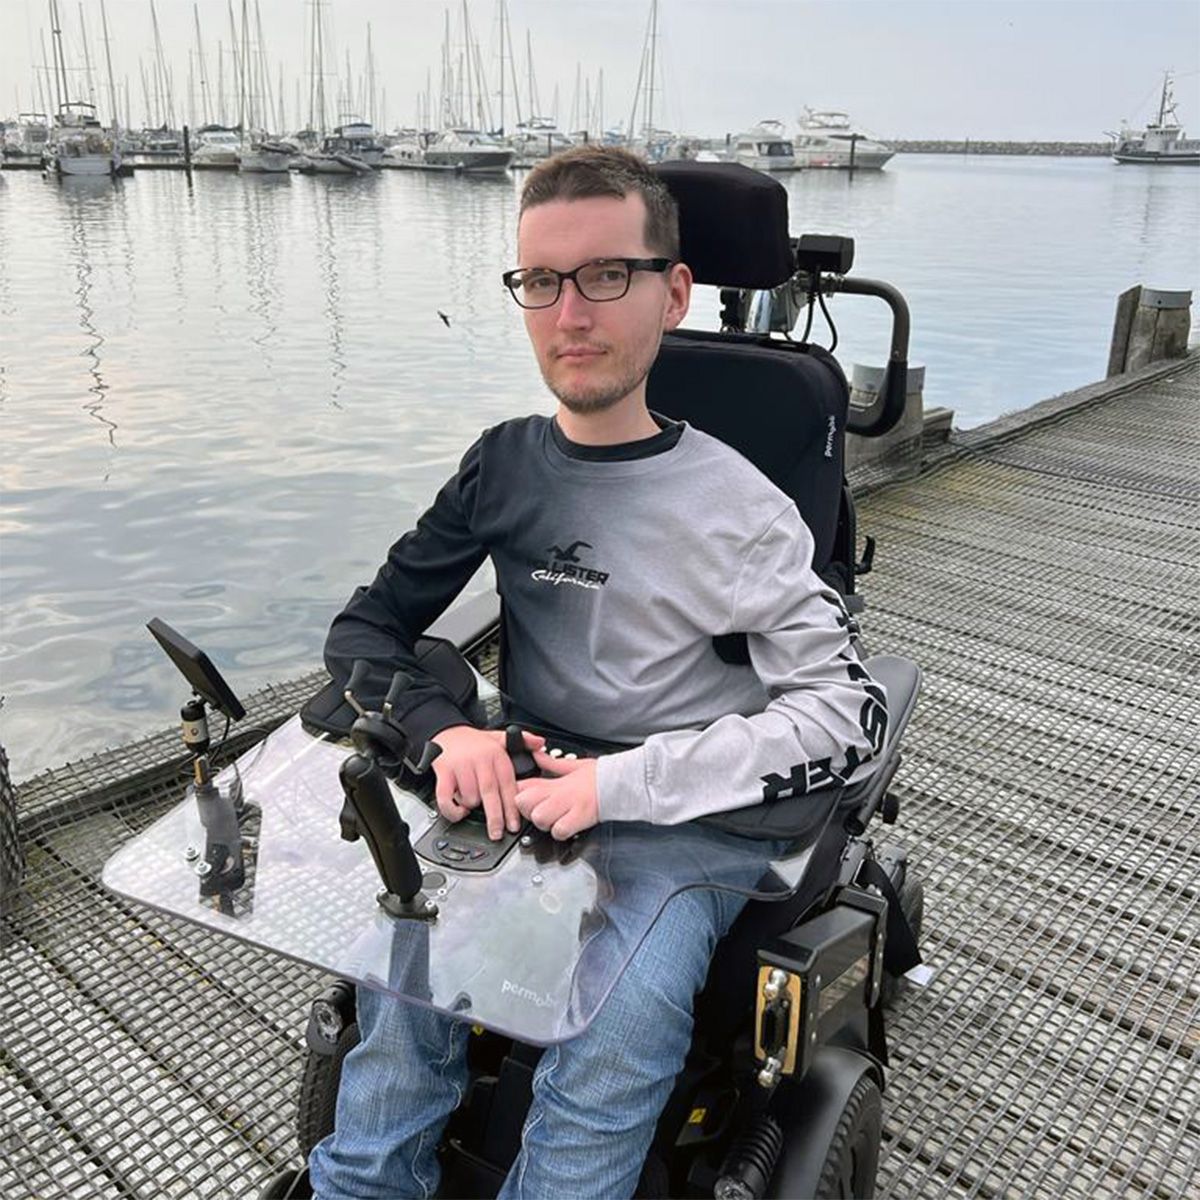 Marcel sitting in his wheelchair on a dock with sailboats in the background